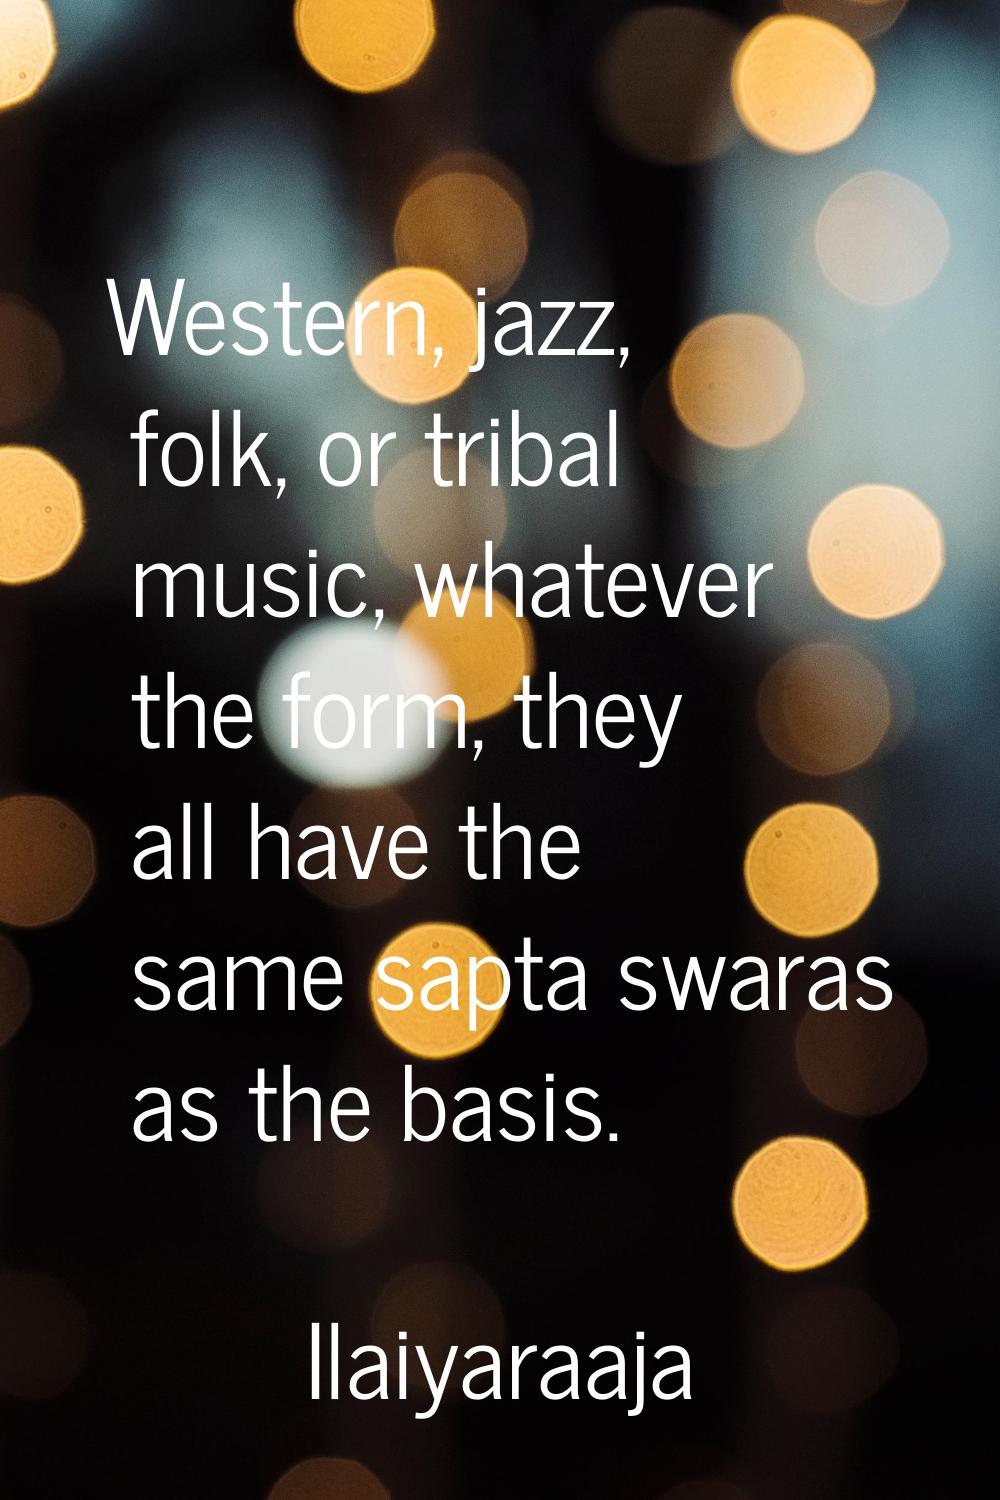 Western, jazz, folk, or tribal music, whatever the form, they all have the same sapta swaras as the